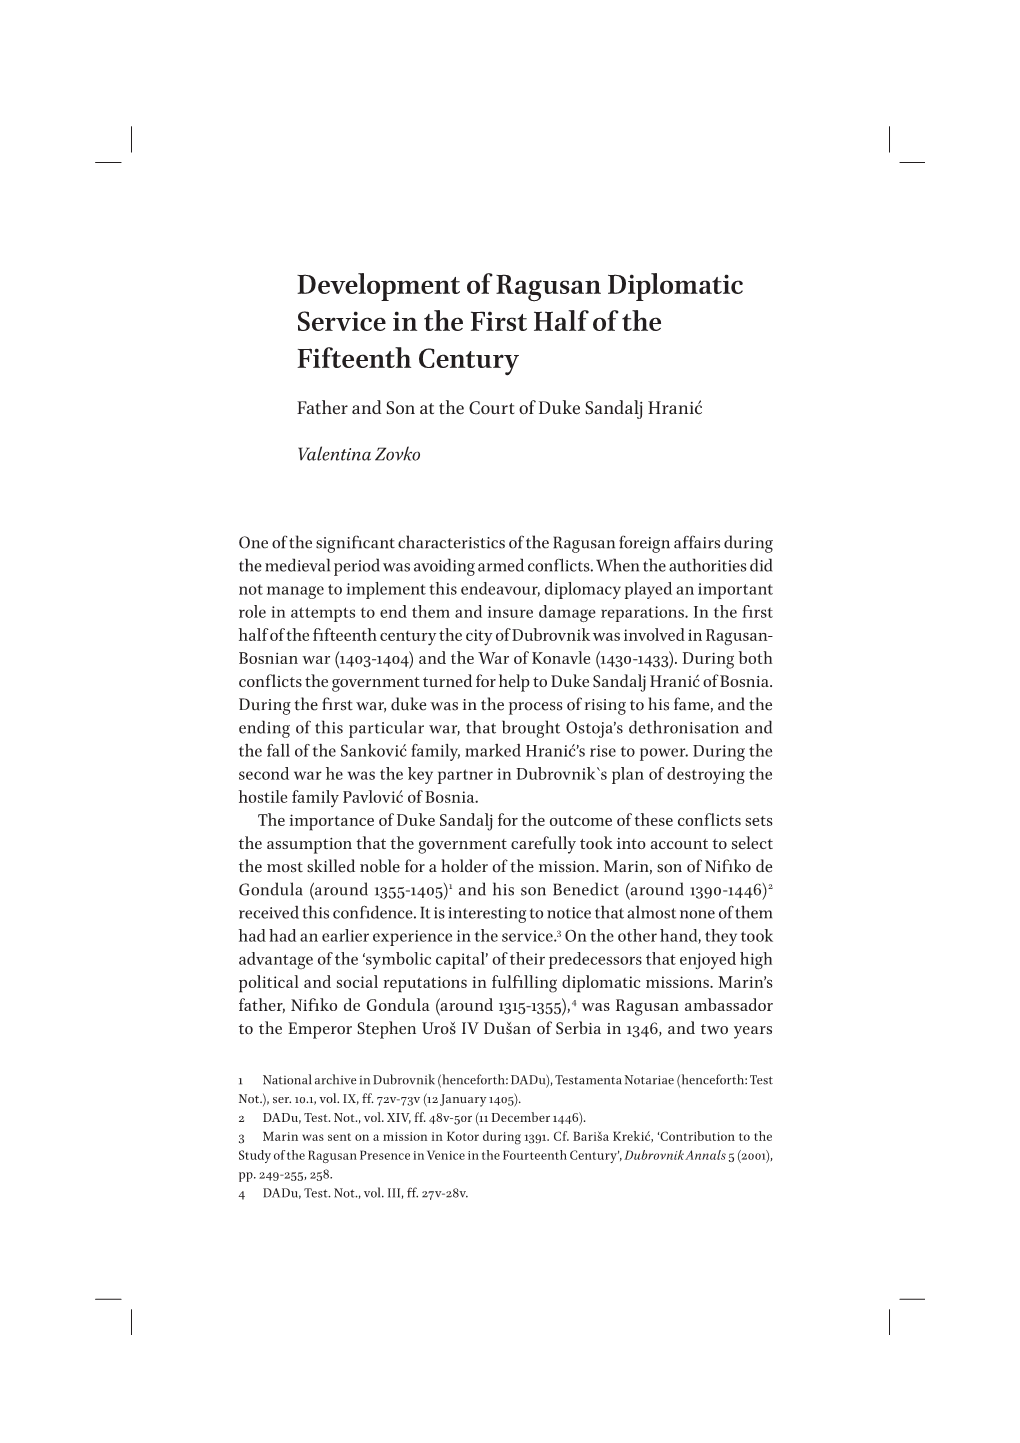 Development of Ragusan Diplomatic Service in the First Half of the Fifteenth Century